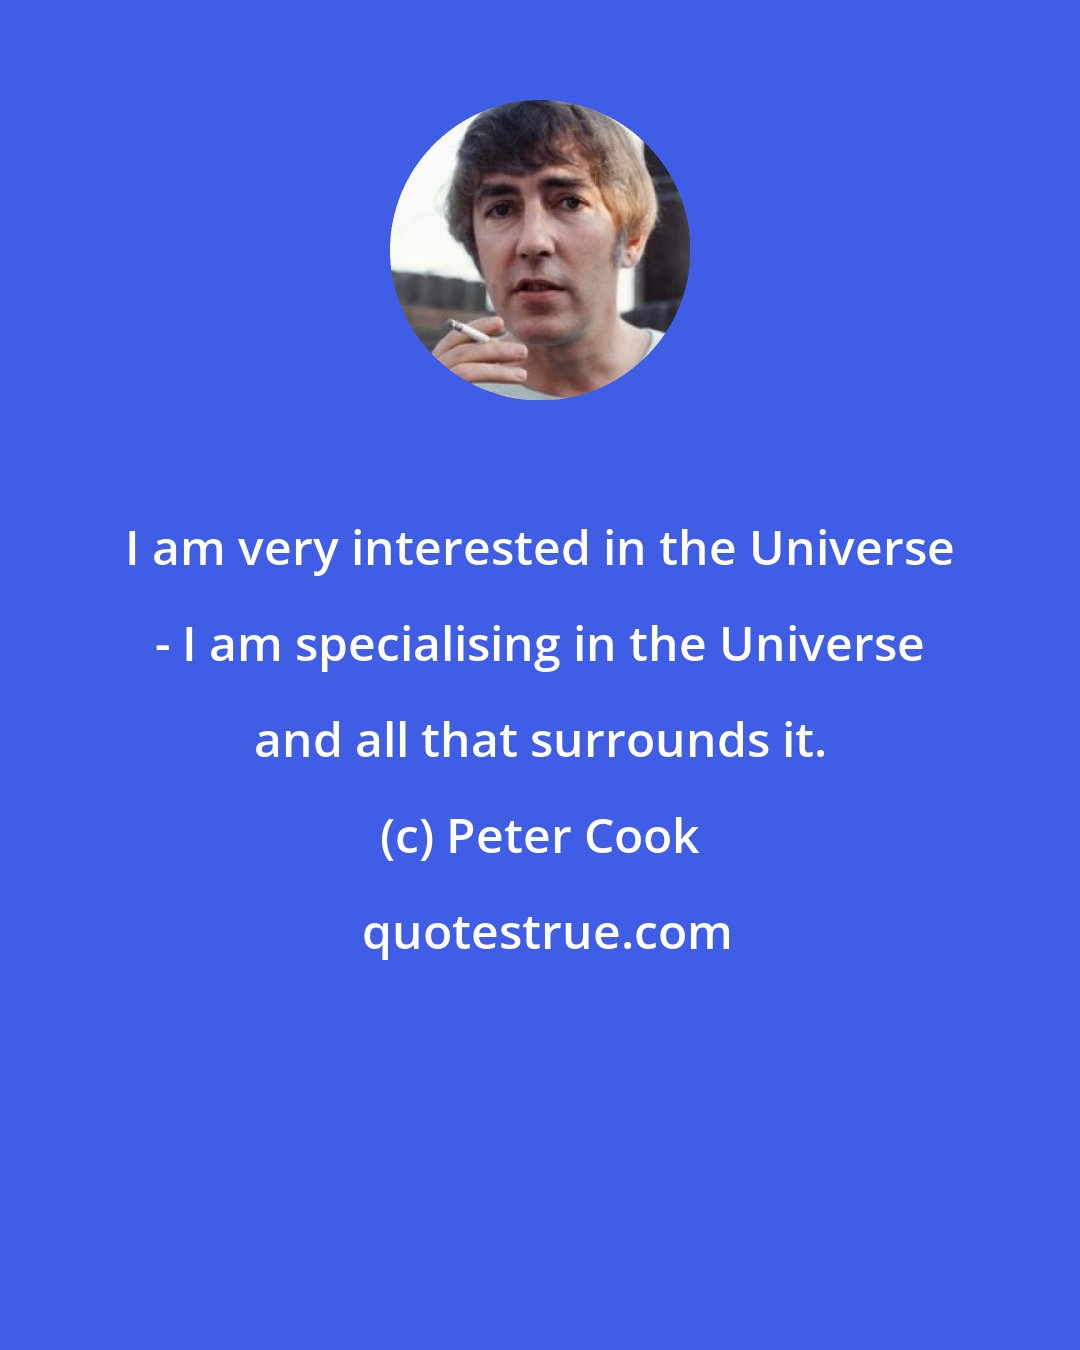 Peter Cook: I am very interested in the Universe - I am specialising in the Universe and all that surrounds it.